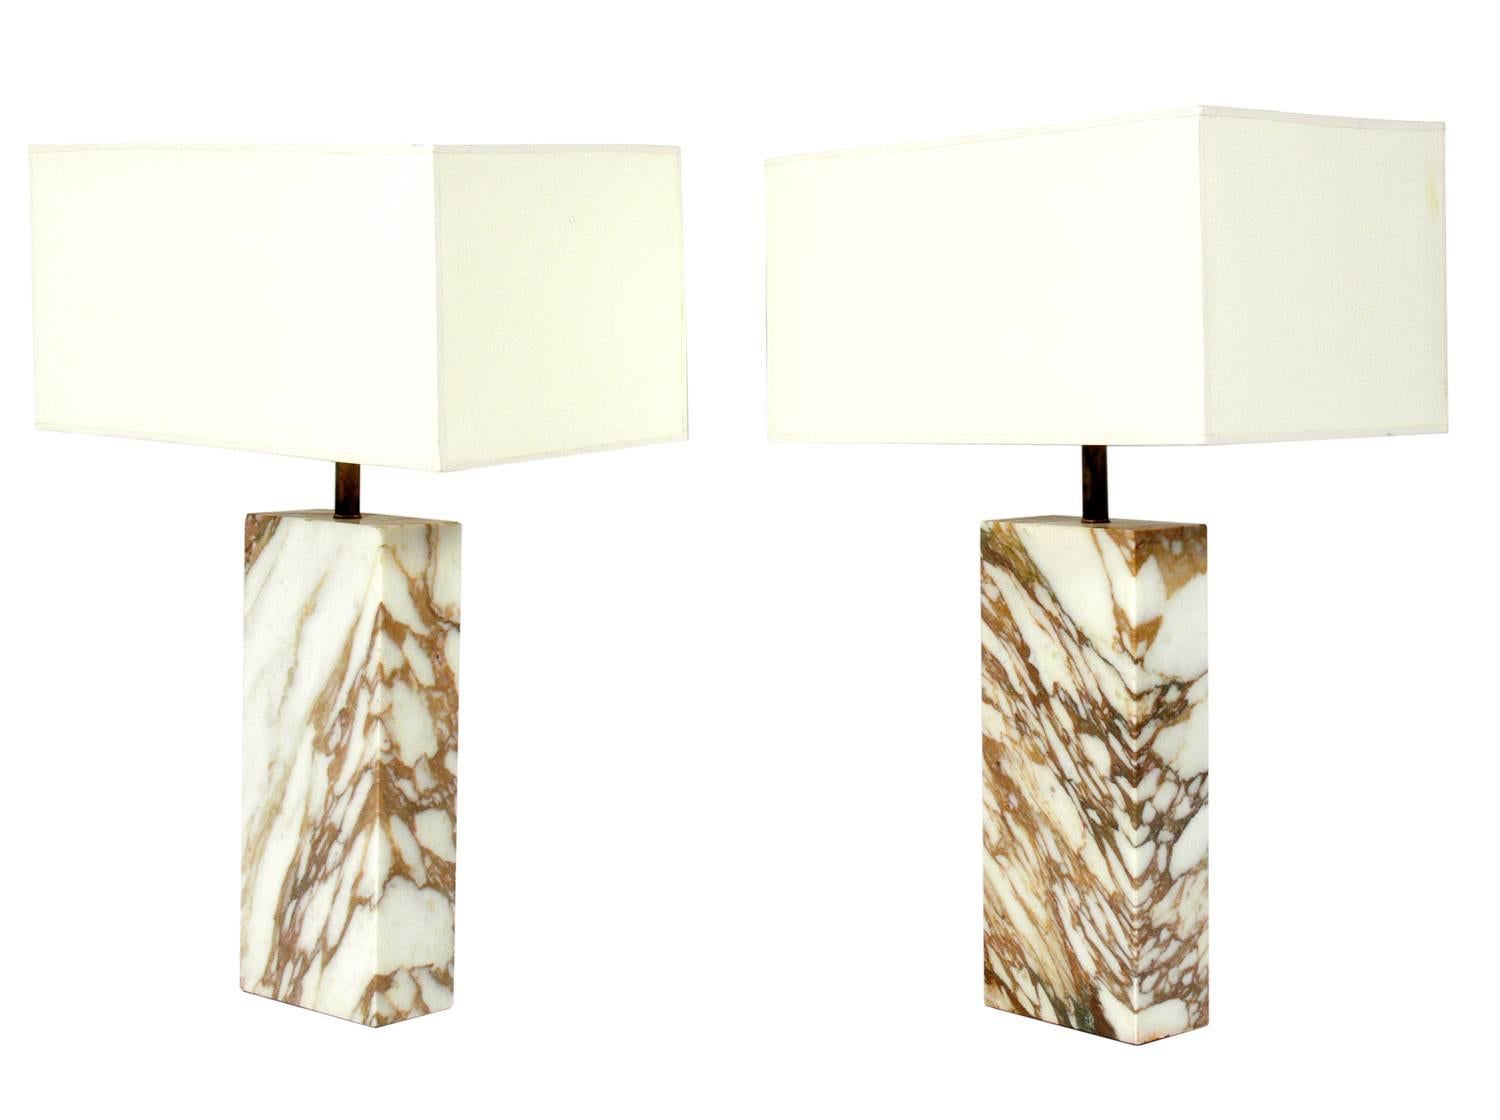 Pair of clean lined marble slab lamps, American, circa 1960s. They exhibit beautiful tan-caramel color graining in the ivory color marble slabs. Rewired and ready to use.